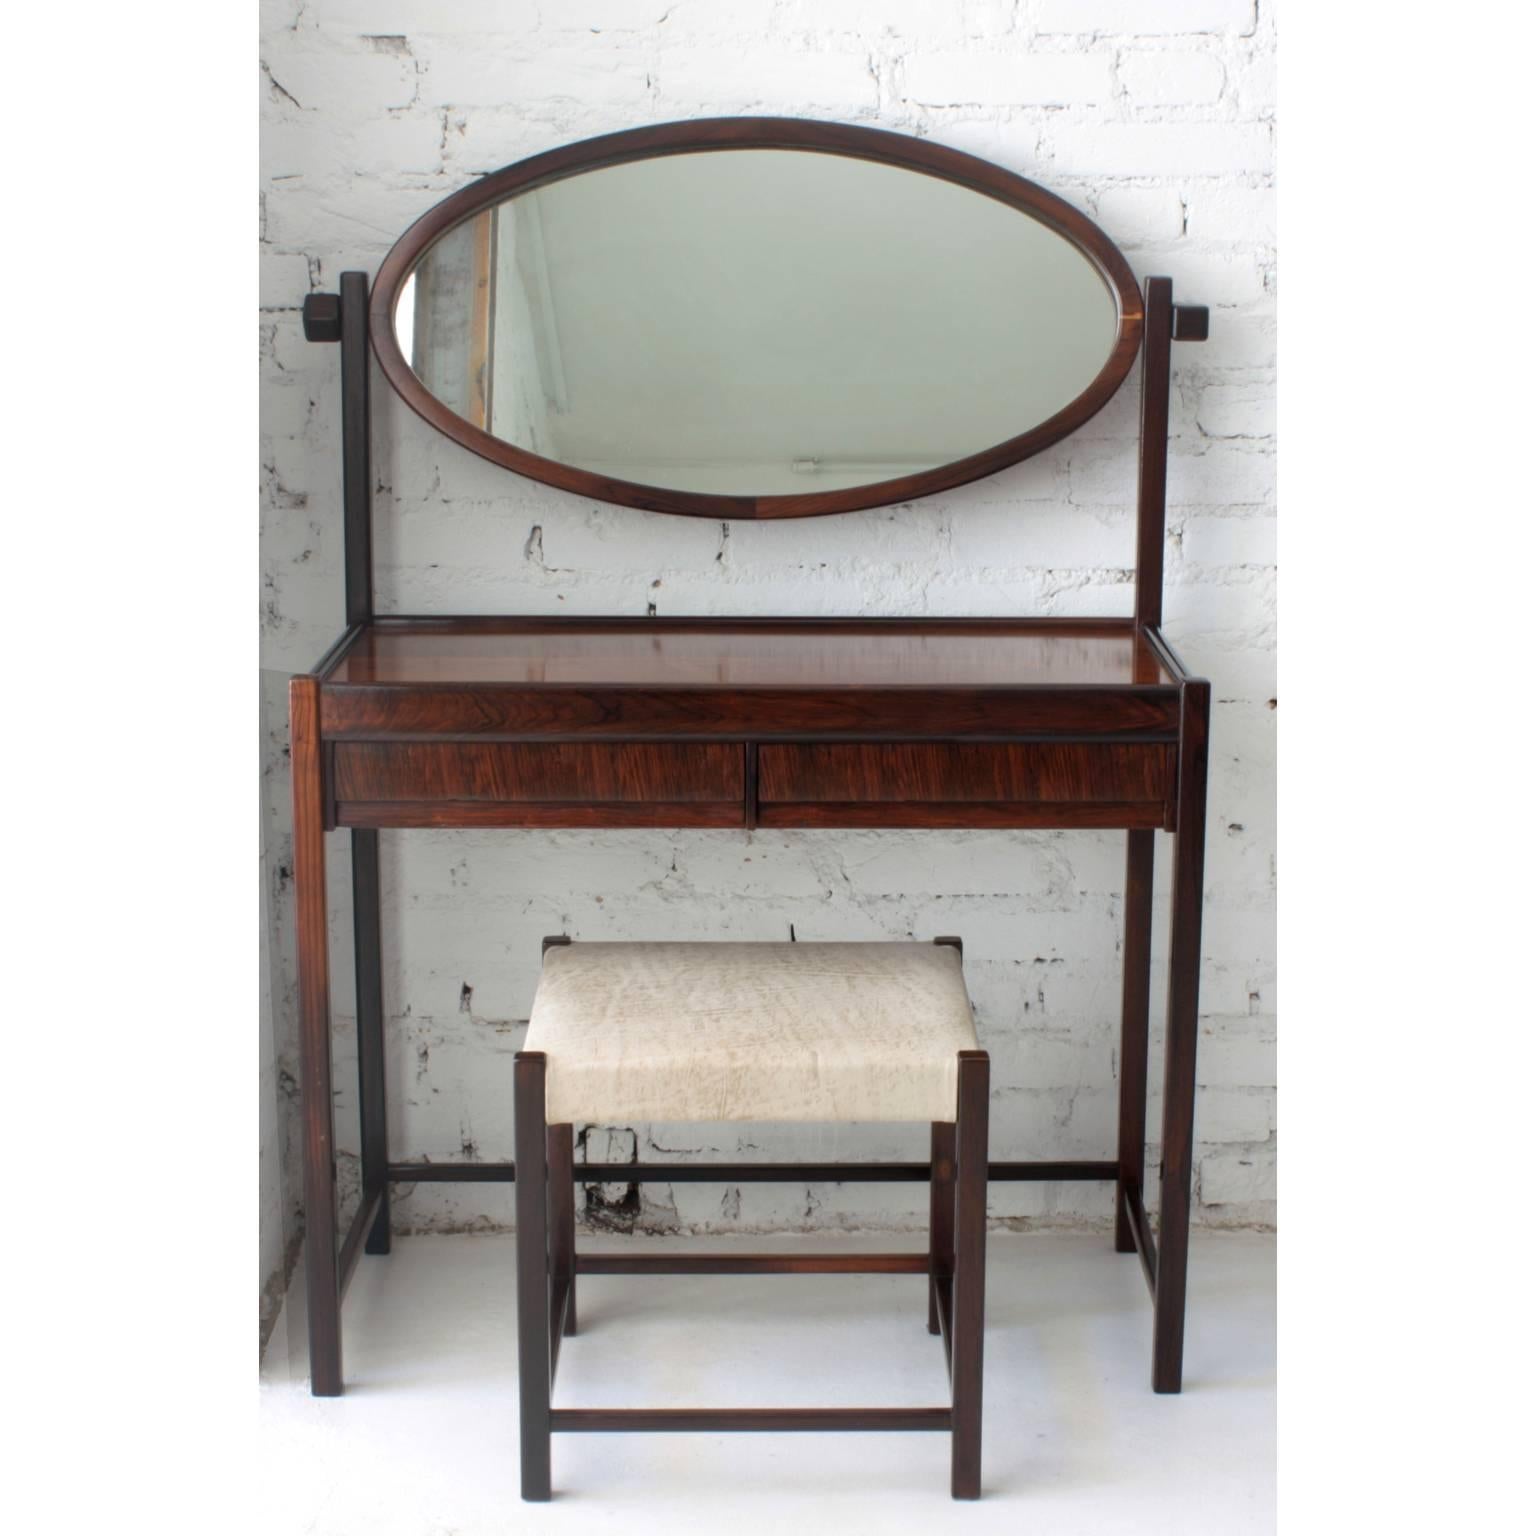 Brazilian Modern vanity dresser by Ernensto Hauner for Mobilinea in jacaranda and mirror, Brasil, 1960s

Mobilinea was founded by the Italian immigrant Ernesto Hauner (1931-2002) who arrived in Brazil in 1949 and soon began to work with furniture